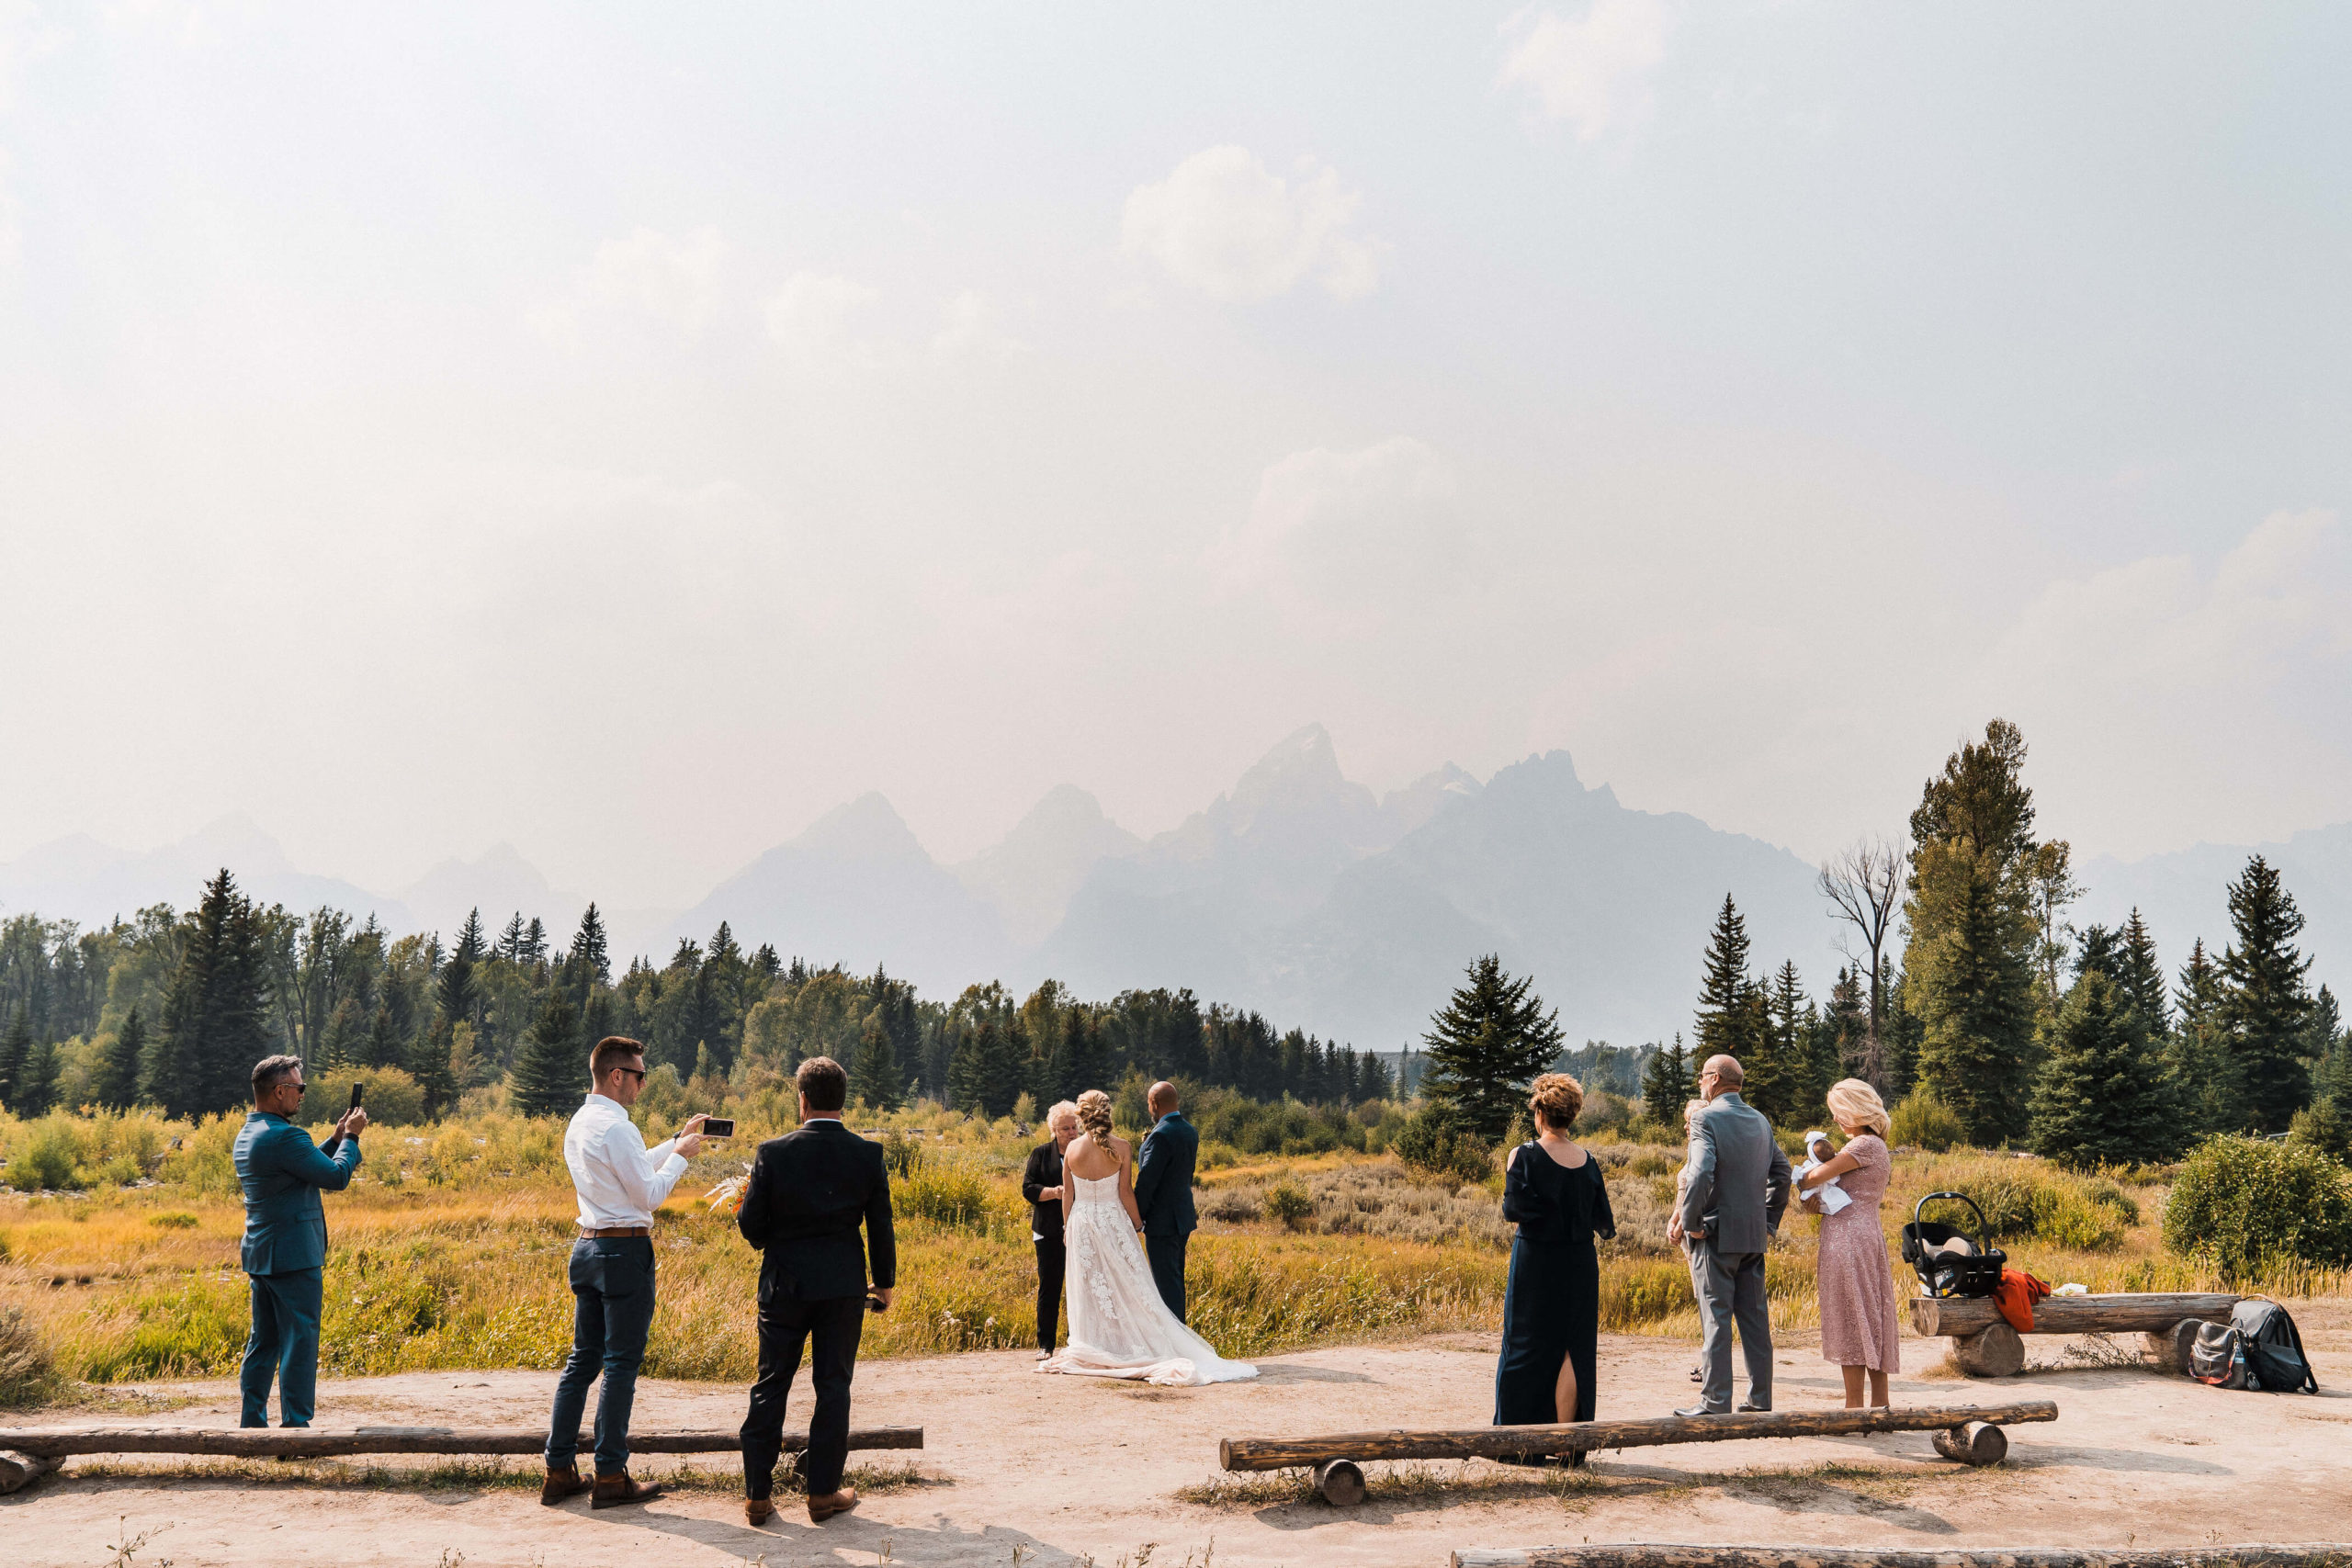 Small wedding ceremony at a national park